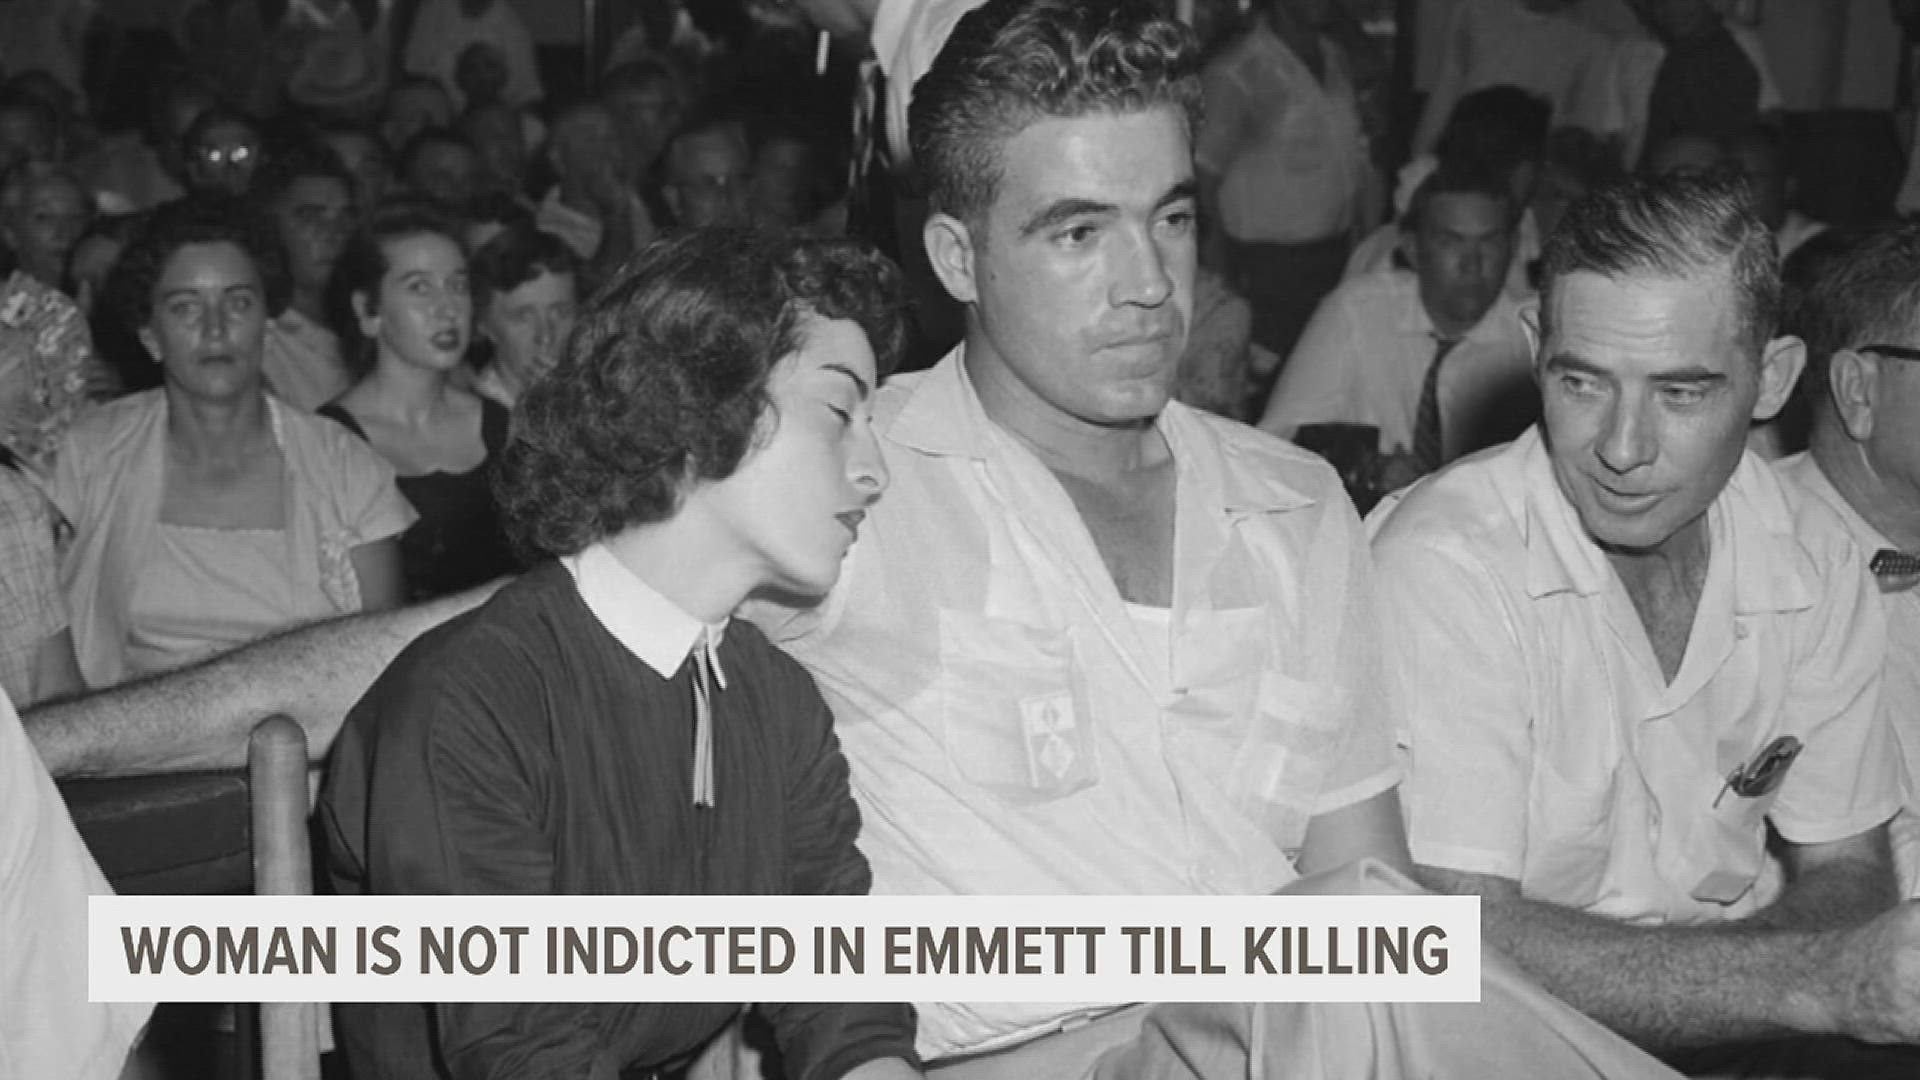 It's increasingly unlikely that the 87-year-old woman will ever be charged for her role in the events leading to Emmett Till's brutal death nearly 70 years ago.